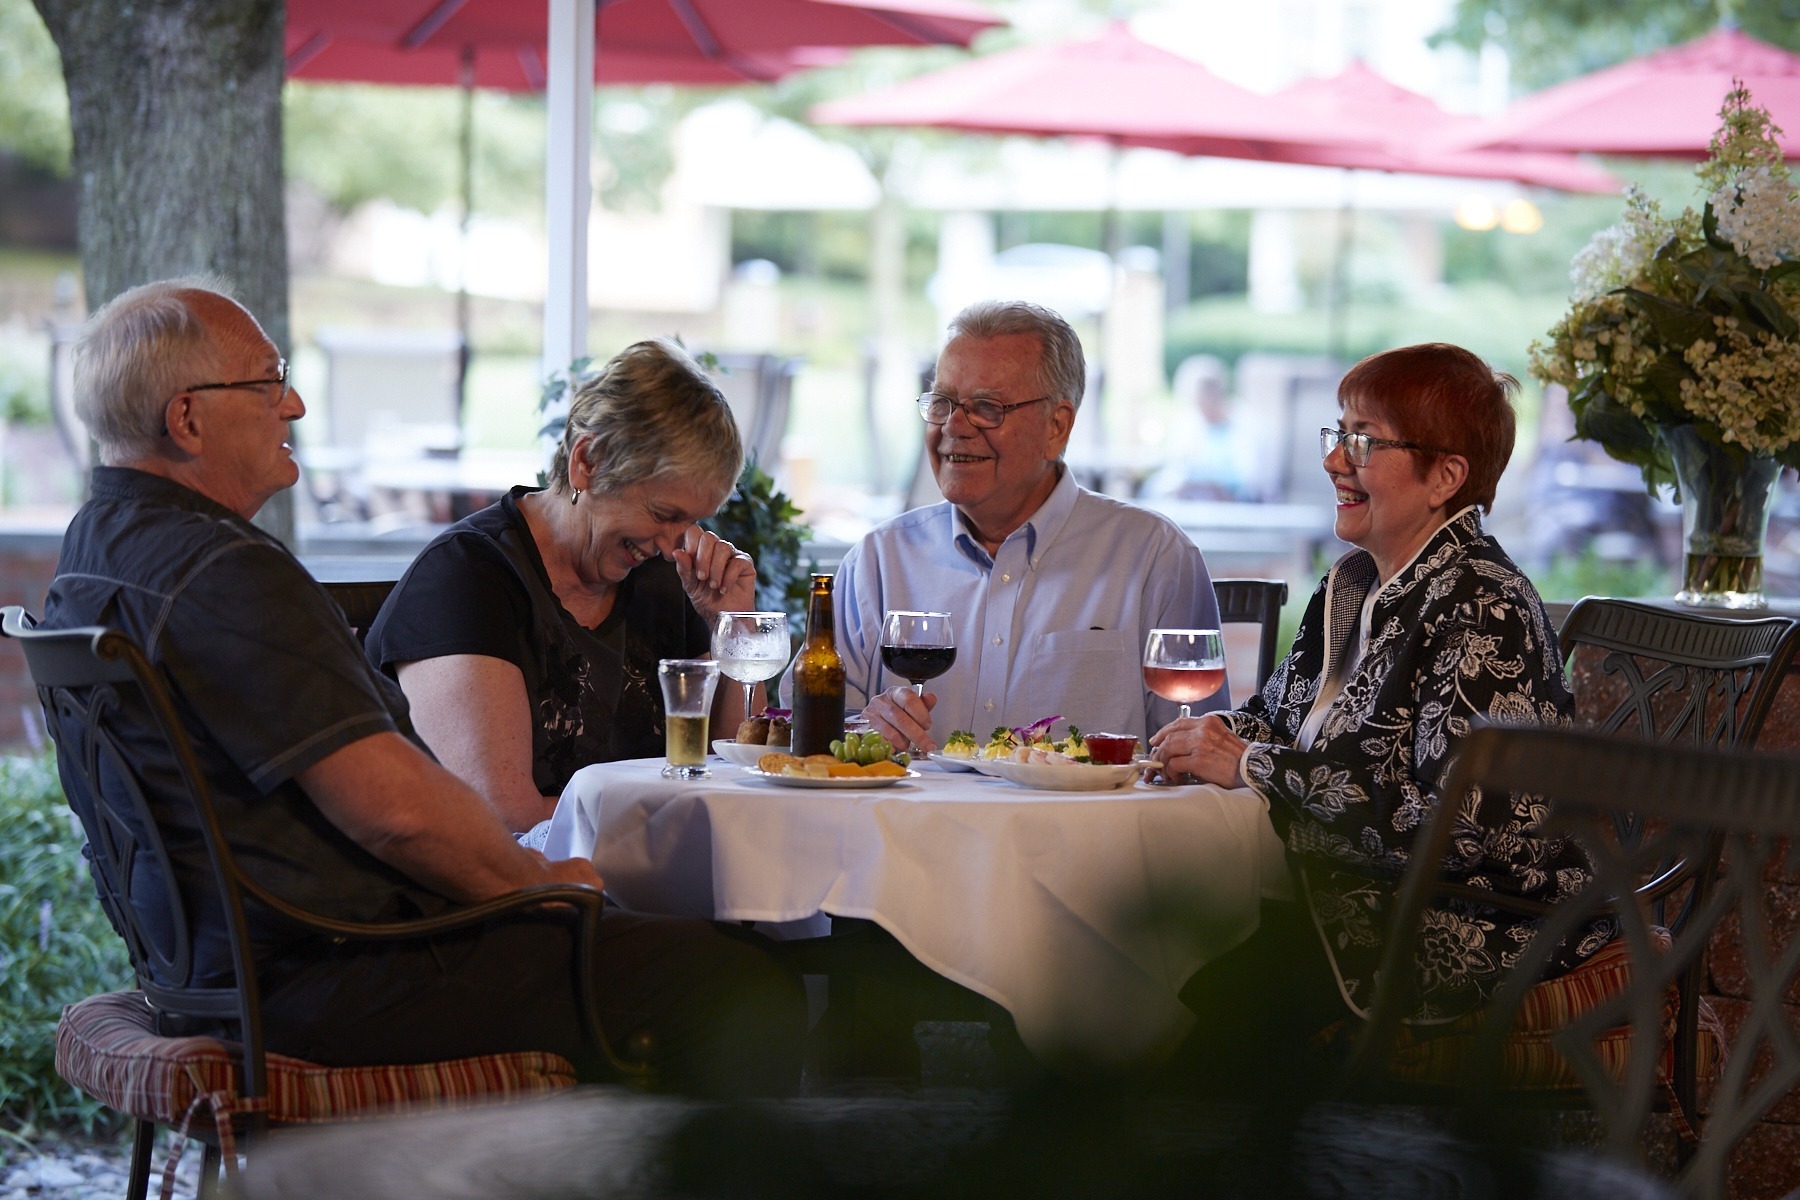 people in a CCRC outdoor table laughing over wine